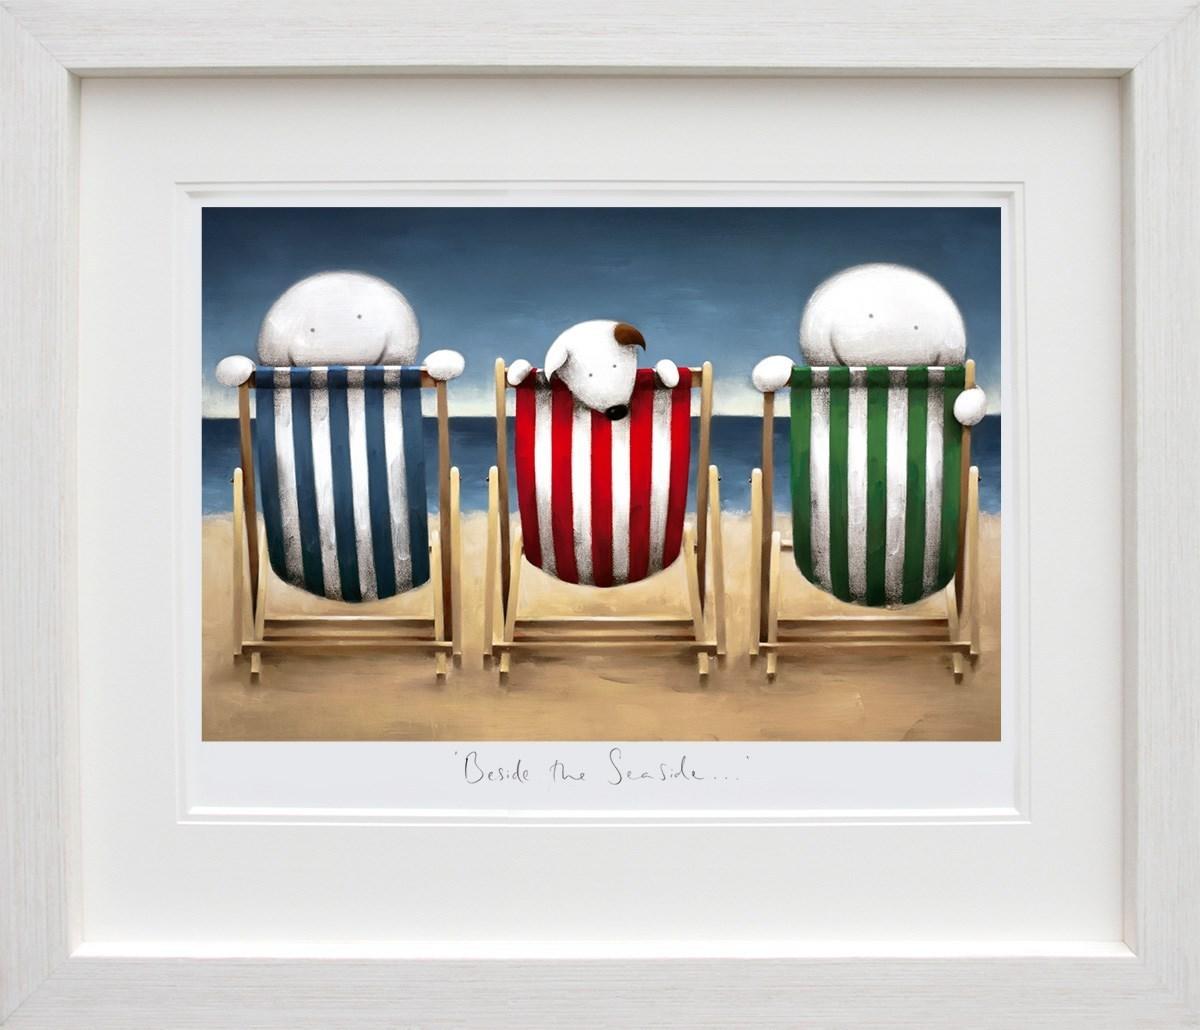 Beside the Seaside by Doug Hyde - Limited Edition art print ZHYD679